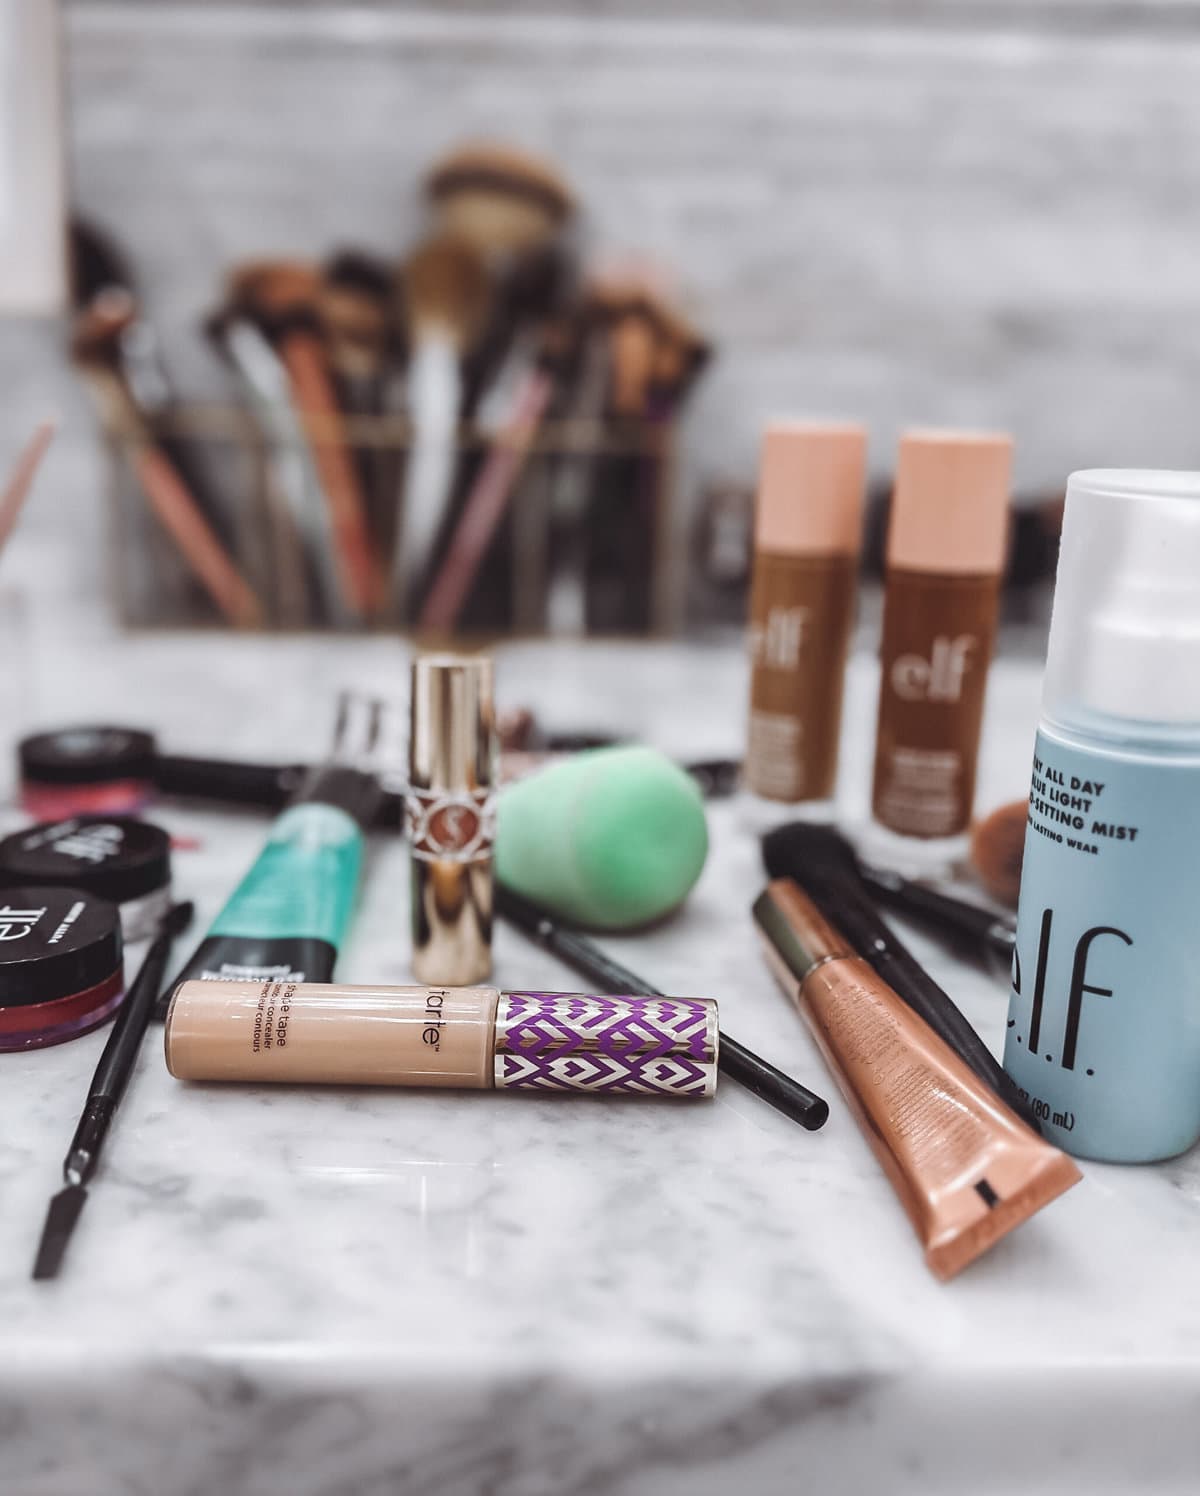 7 Affordable Elf Cosmetics Products That Are Popular For A Reason